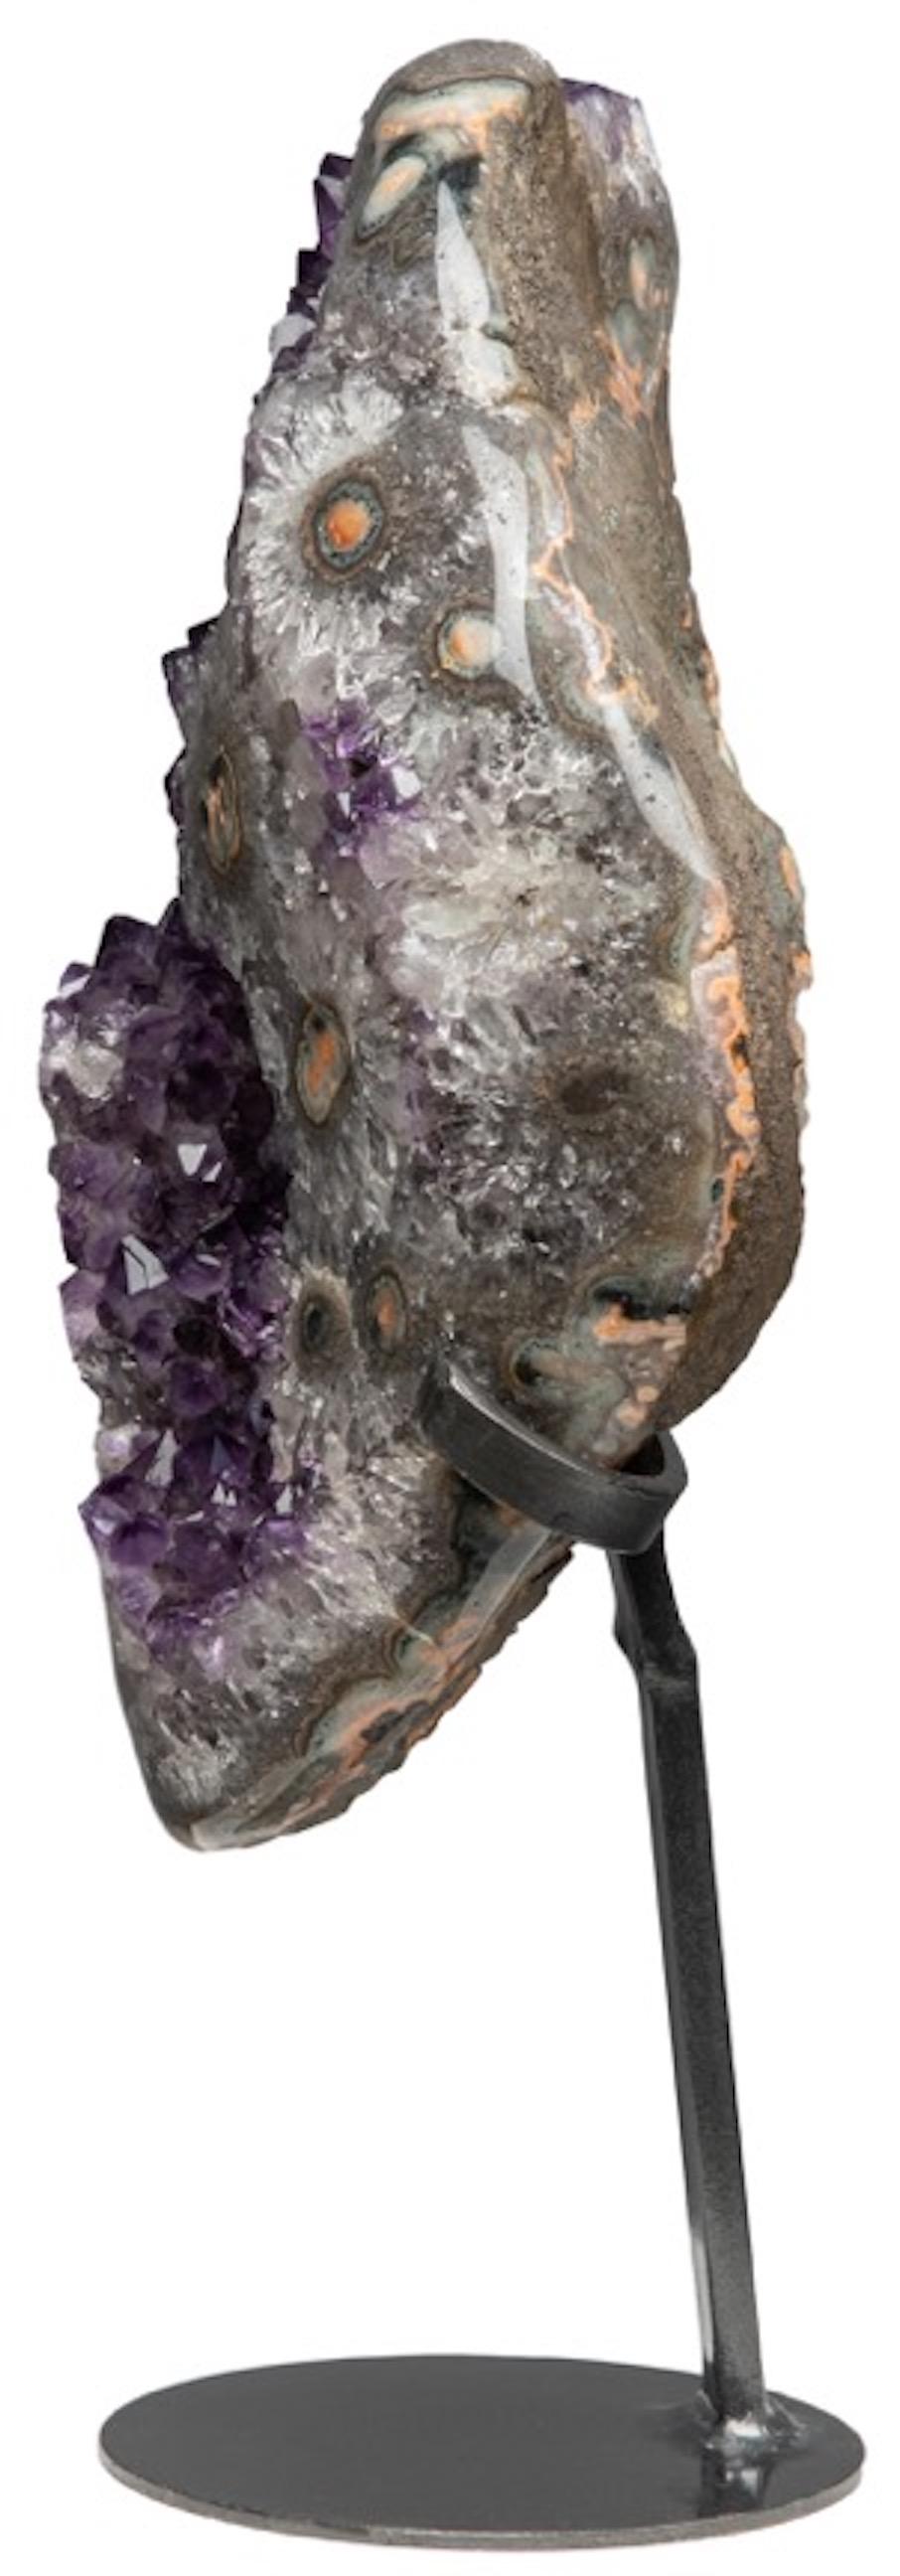 Amethyst Cluster White Quartz Celadonite and Agate with Cut Stalactites on Stand 1